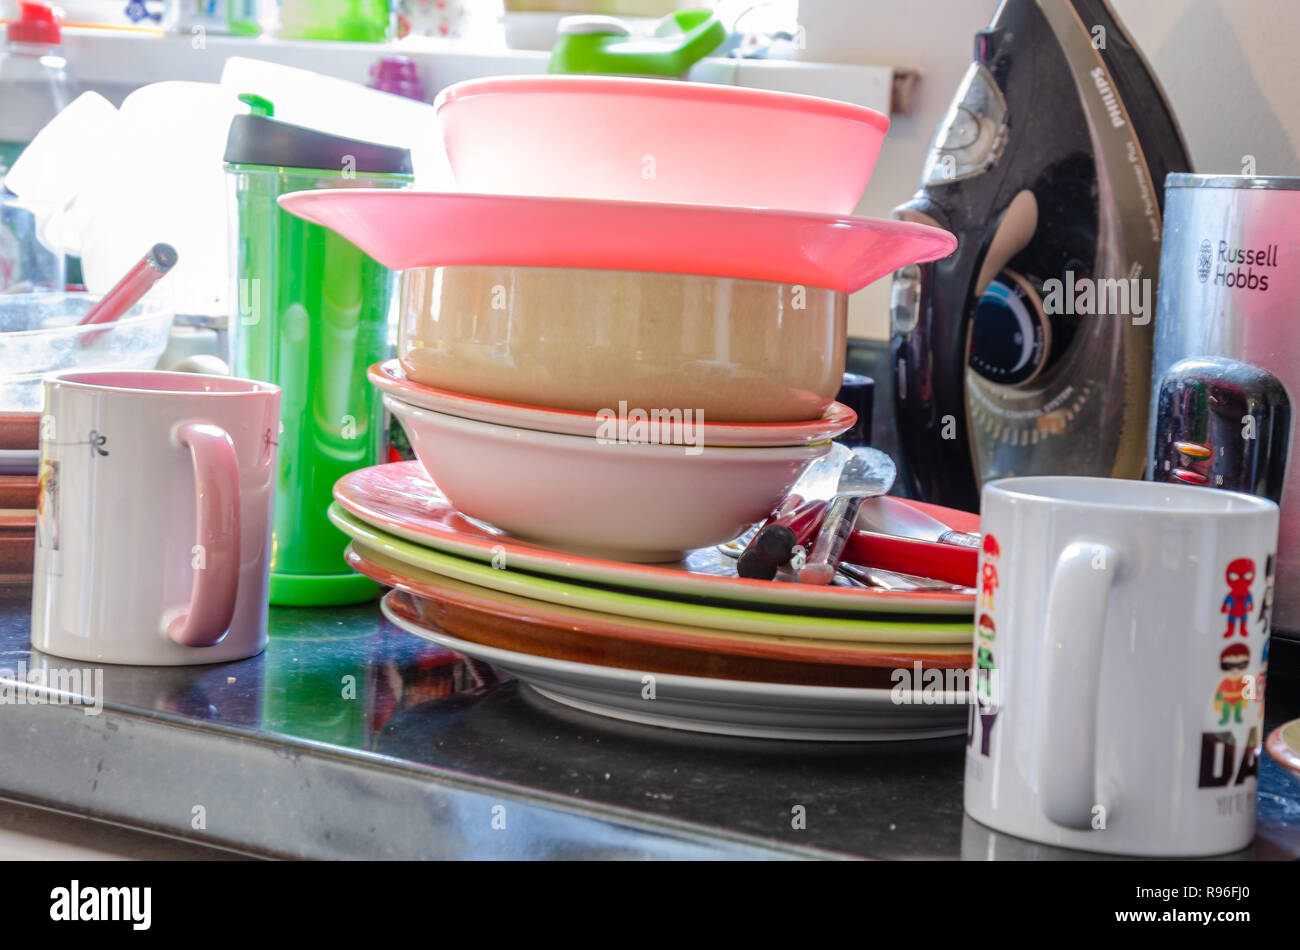 Plates, dishes and mugs piled up on a kitchen worktop ready to be washed up. Stock Photo